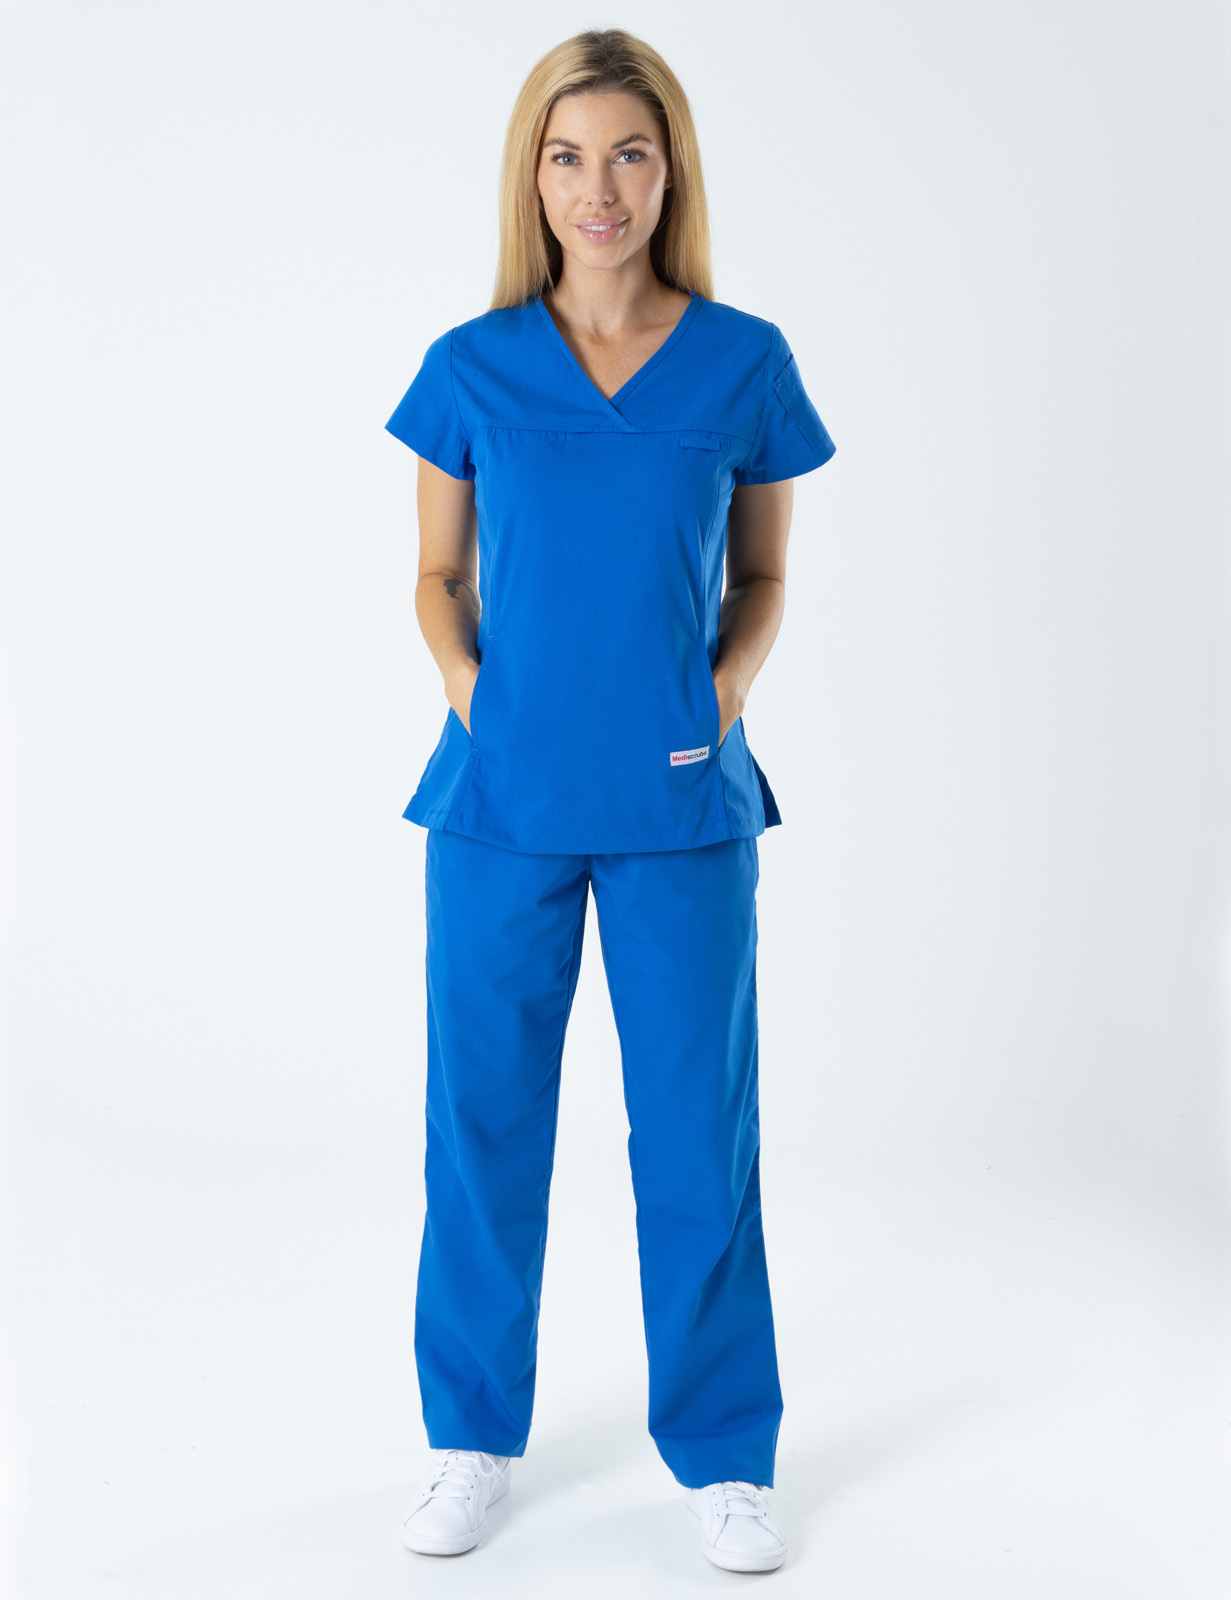 RBWH - Senior Registrar (Women's Fit Solid and Cargo Pants in Royal incl Logos)